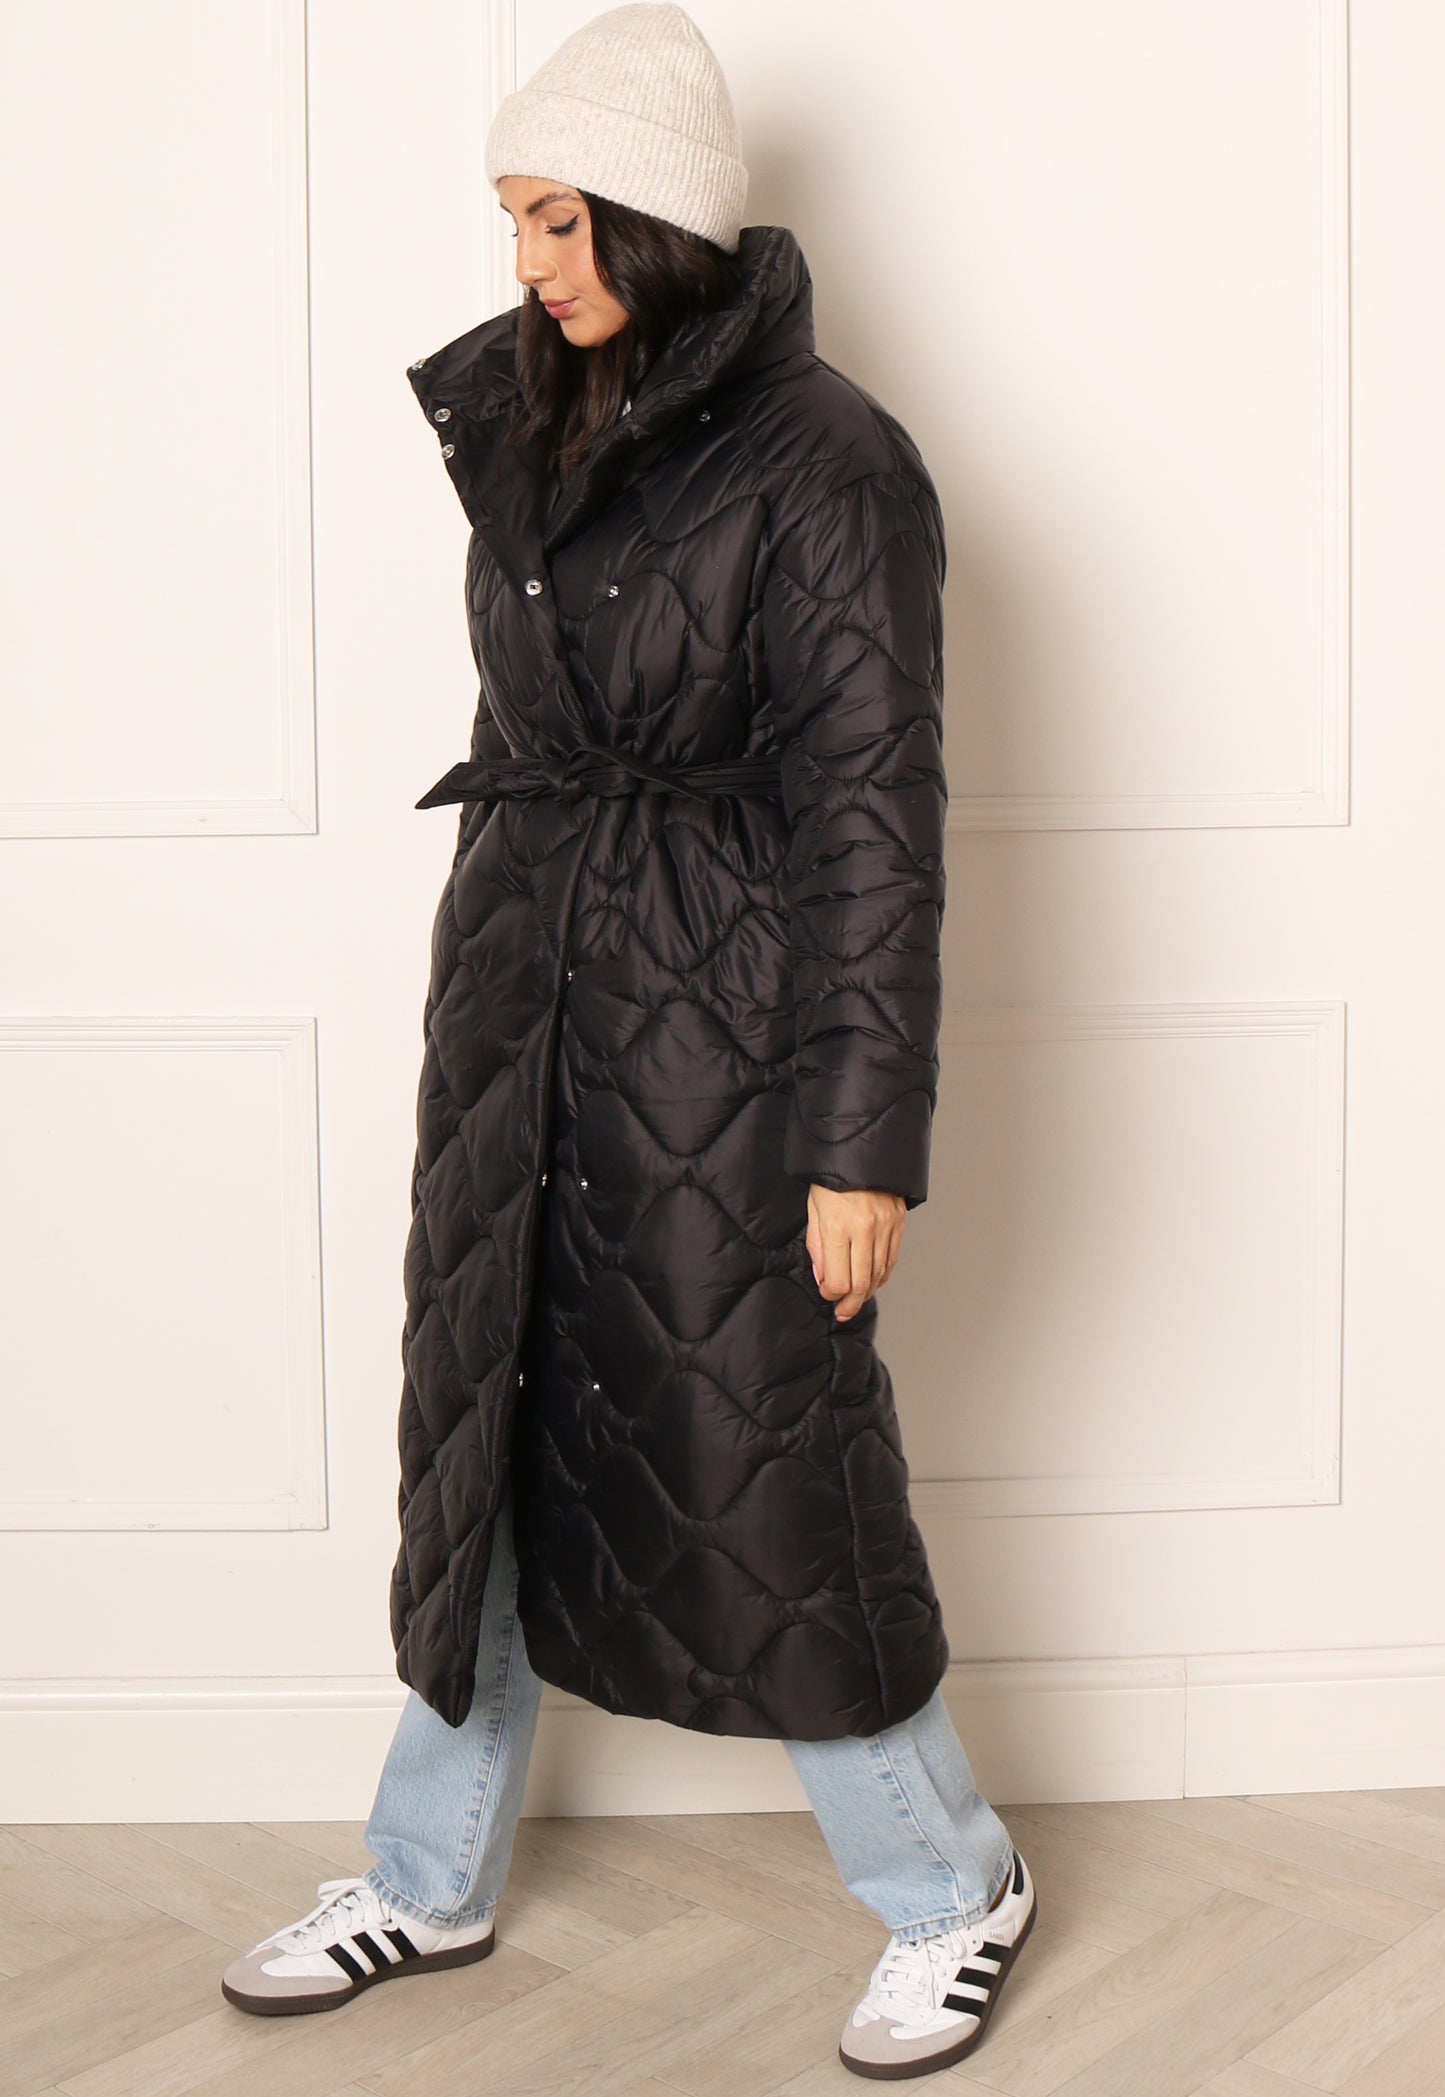 
                  
                    VERO MODA Astoria Onion Quilted Midi Jacket with High Neck & Belt in Black - One Nation Clothing
                  
                